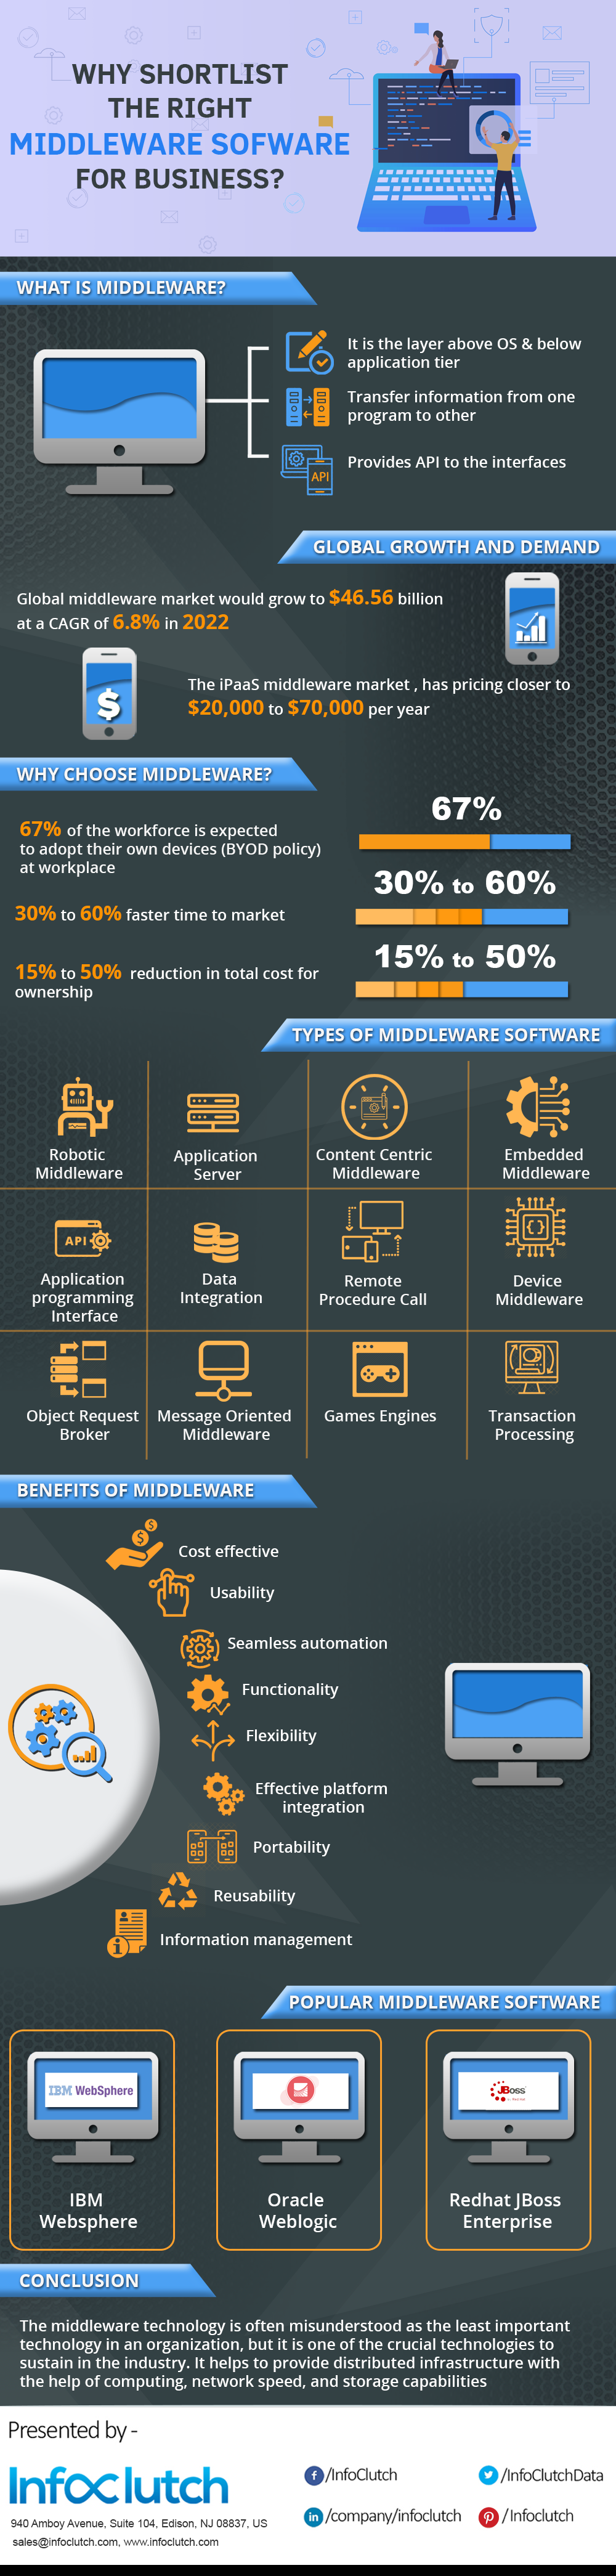 Why Shortlist The Right Middleware Software For Business